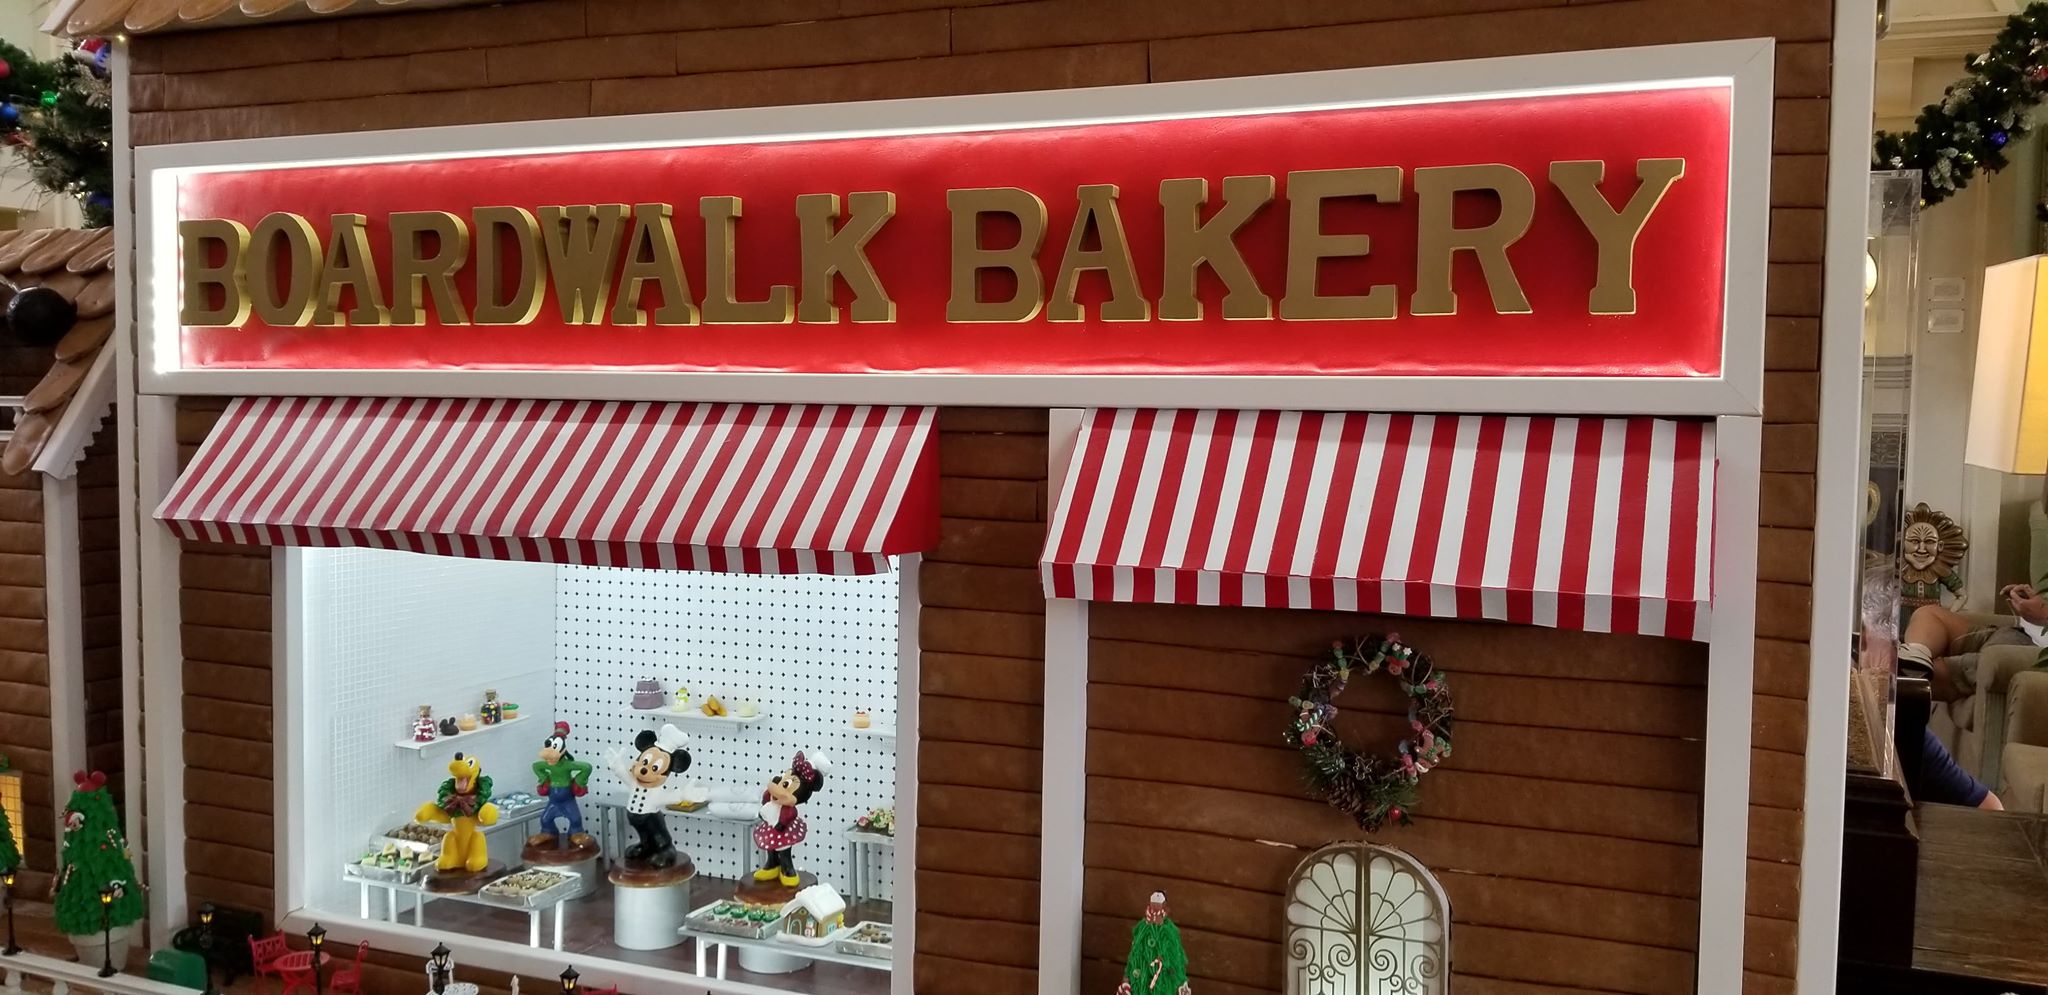 Holiday Cheer For Visitors to Disney’s Boardwalk Resort – A Festive Gingerbread House Awaits